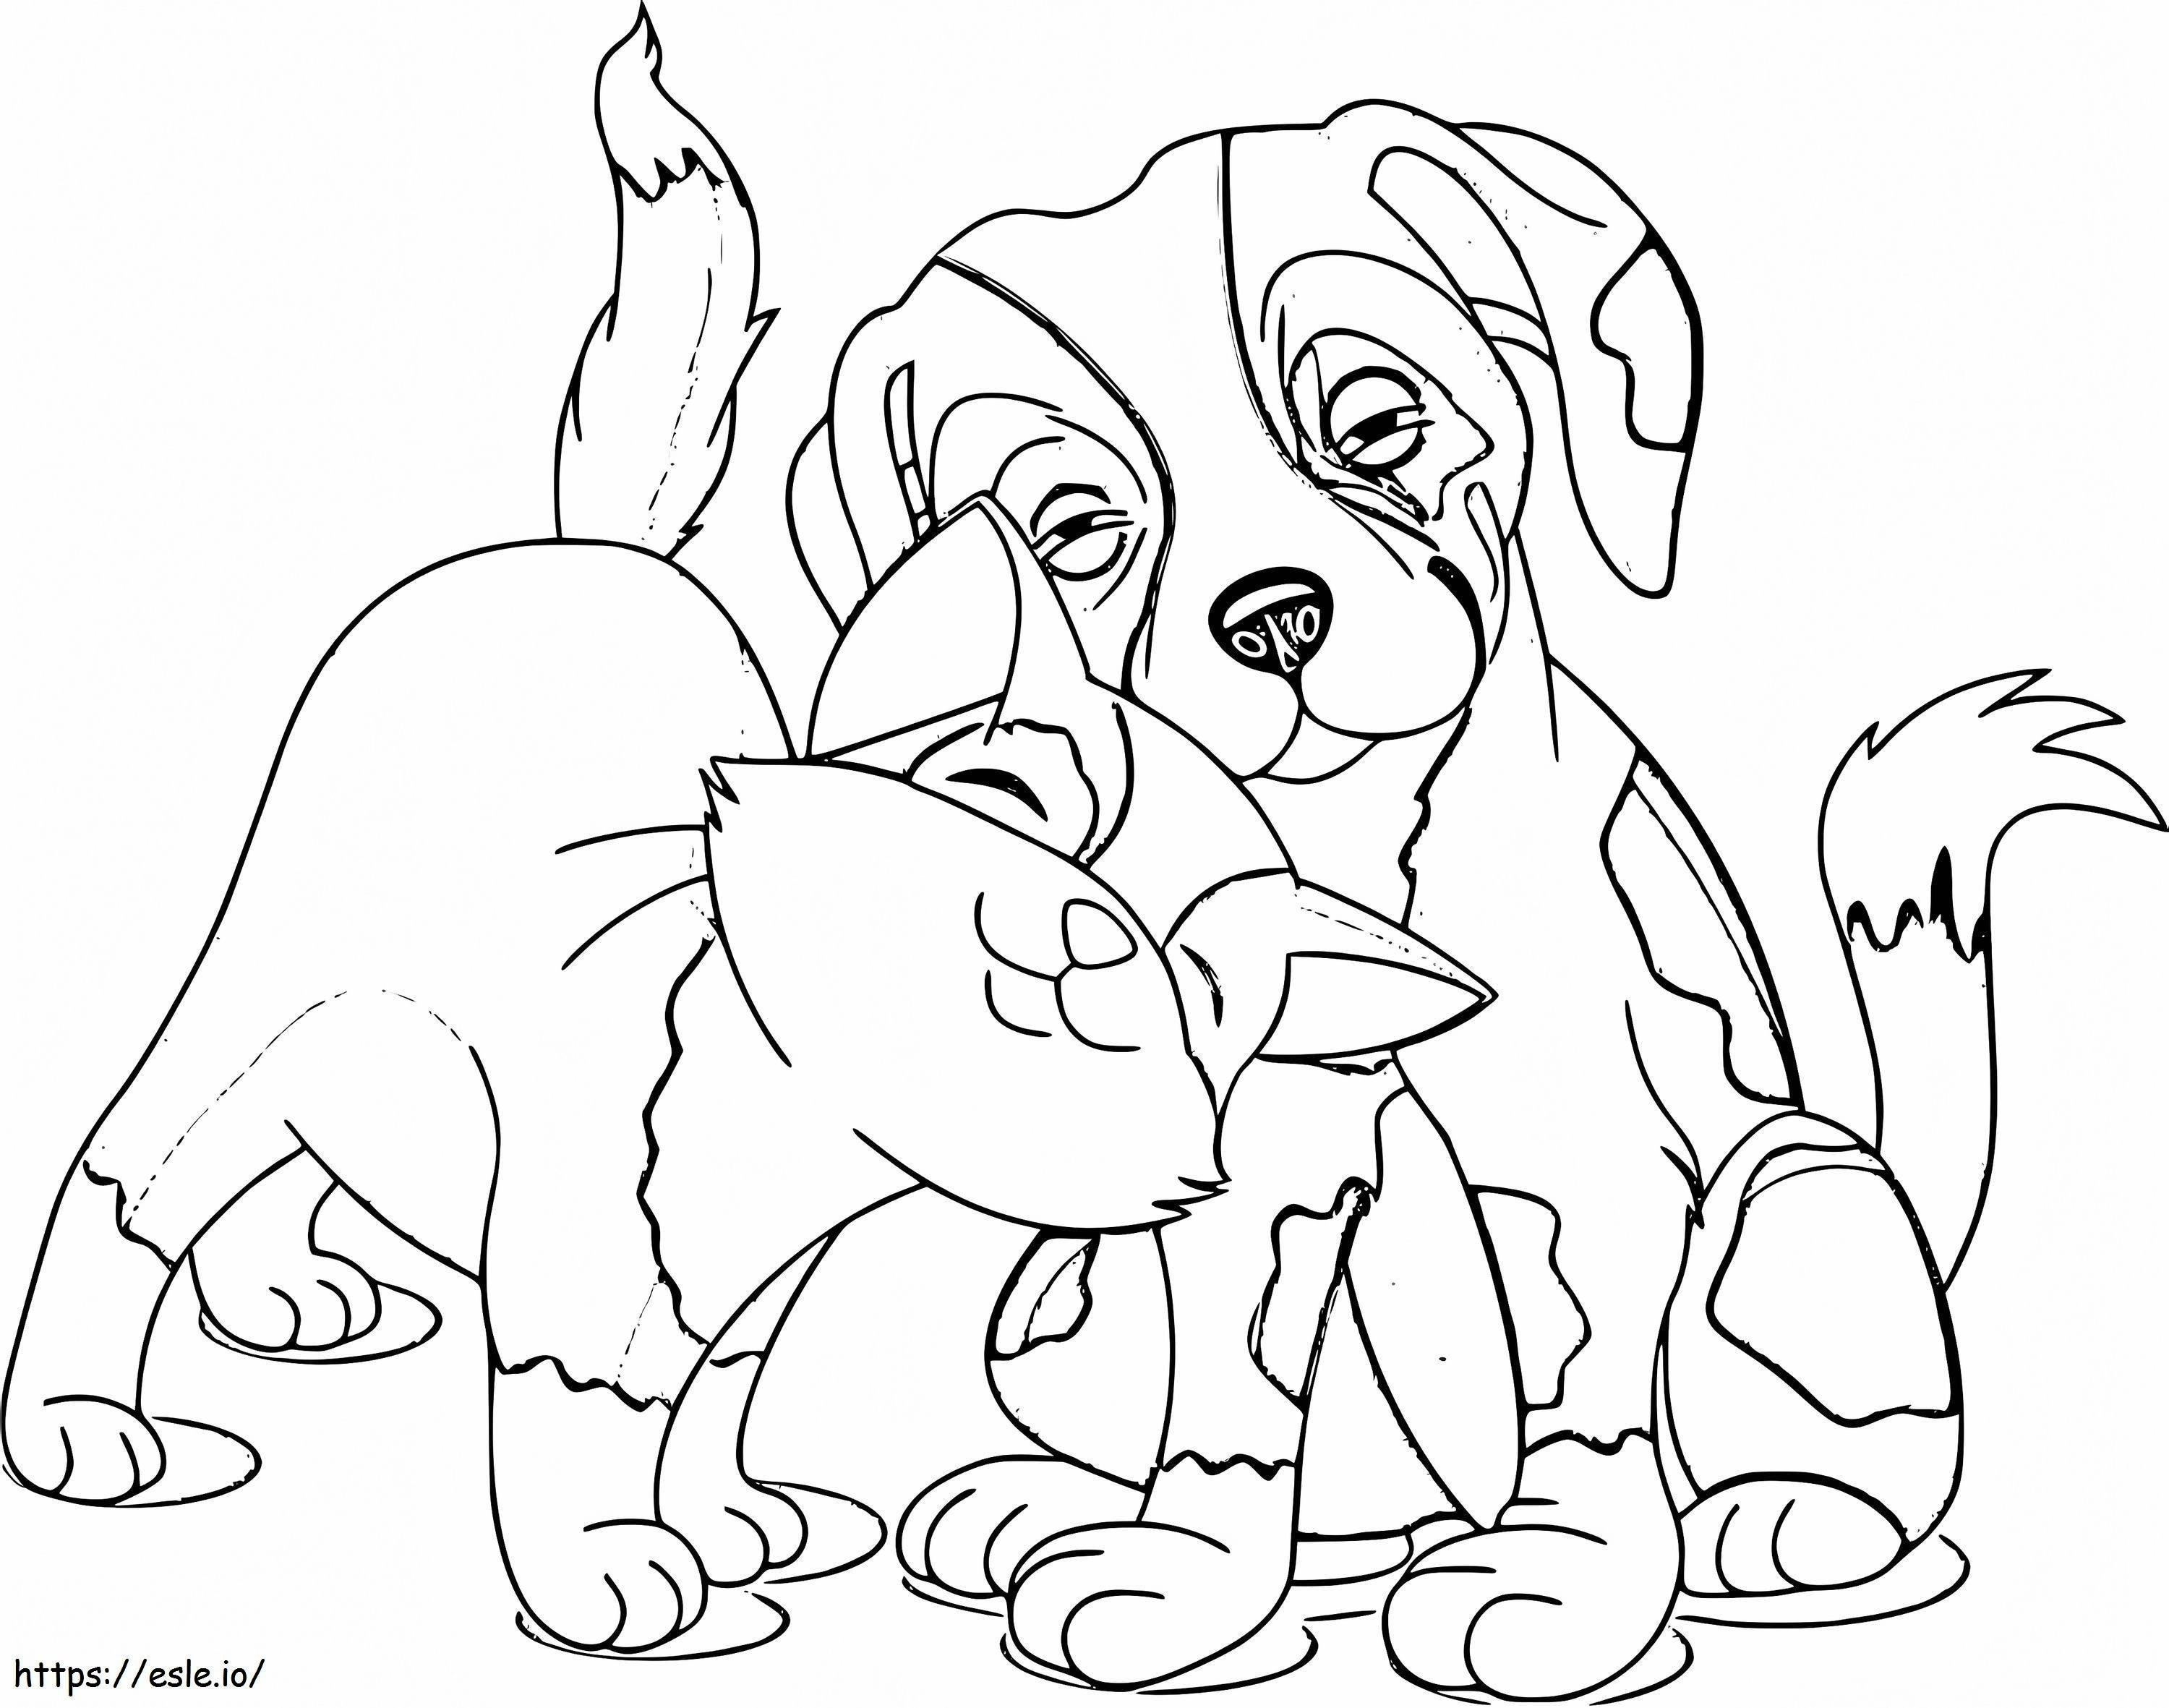 Dog And Cat Friendship coloring page